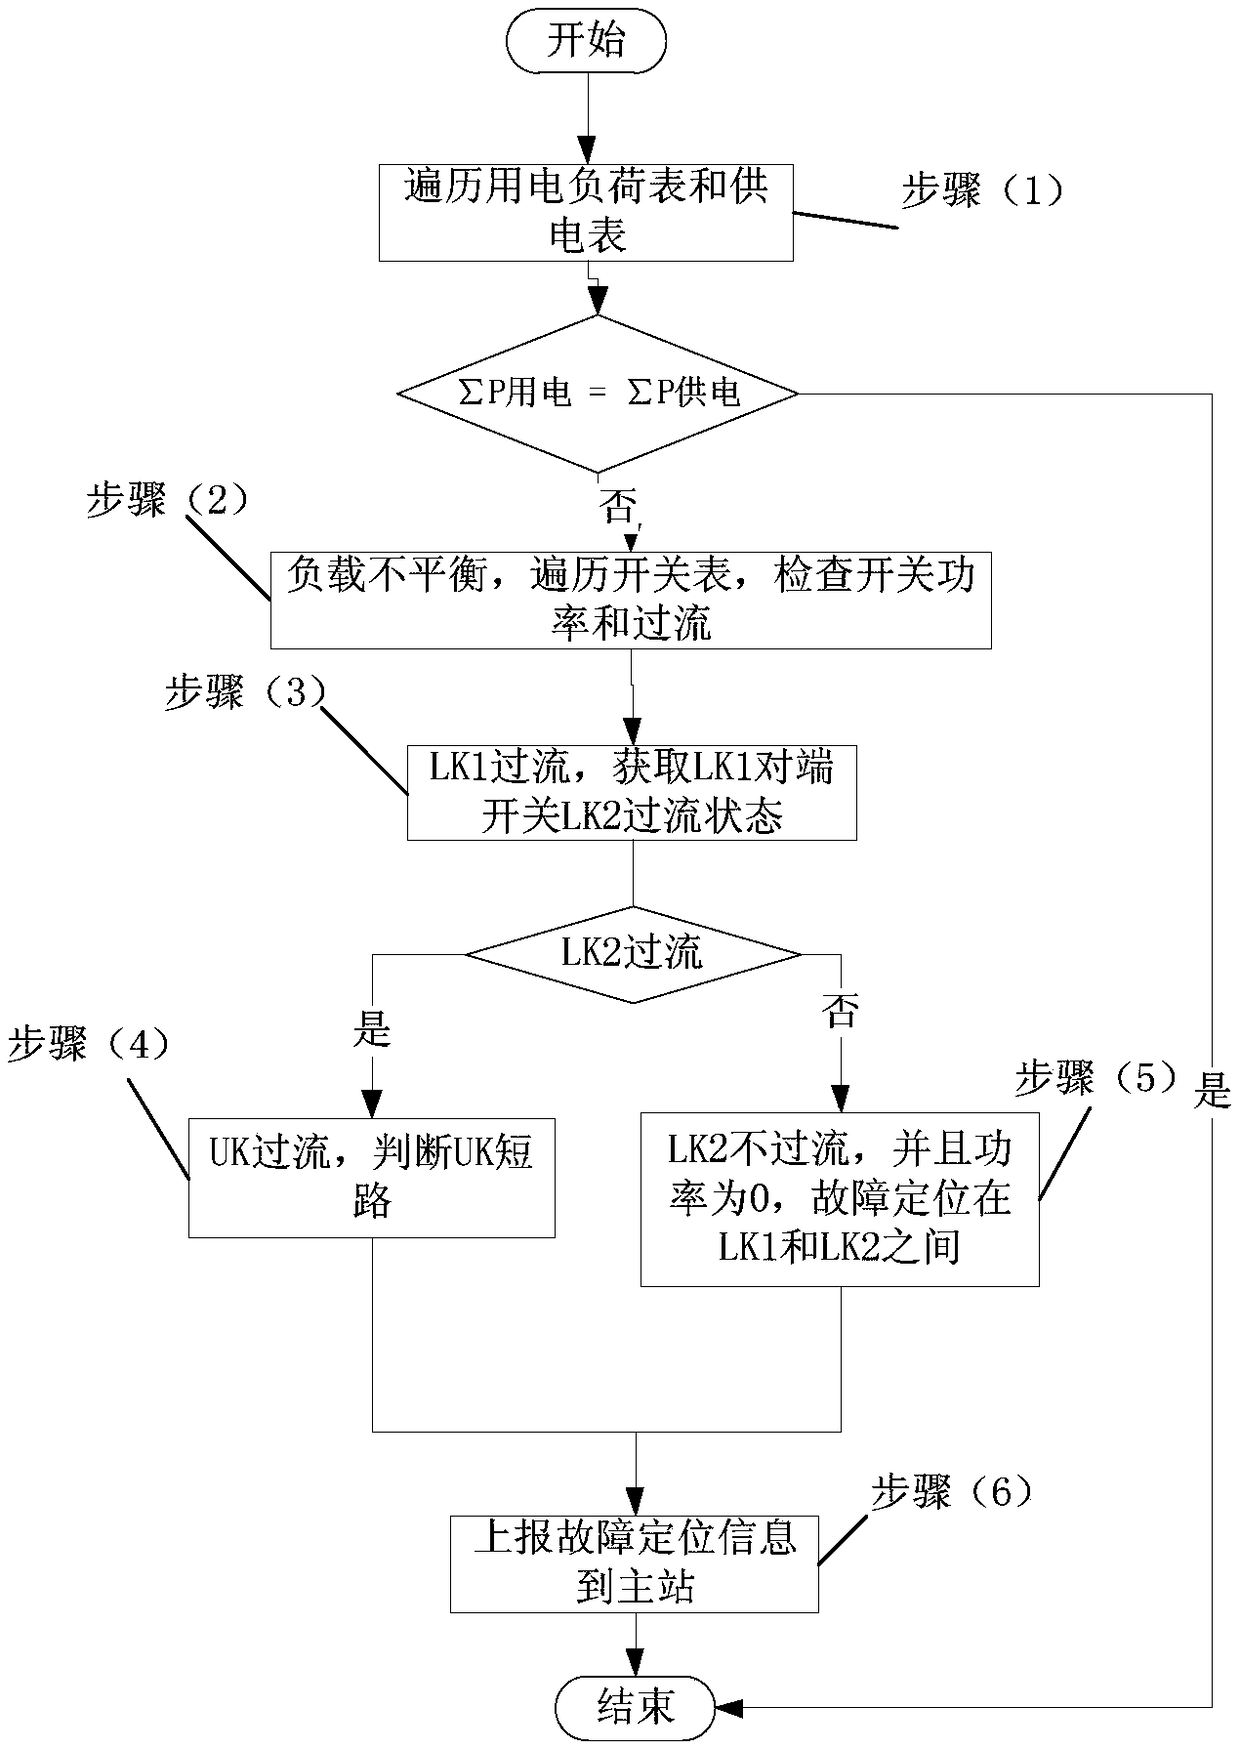 A Fault Location Method Based on Unit System Distribution Network